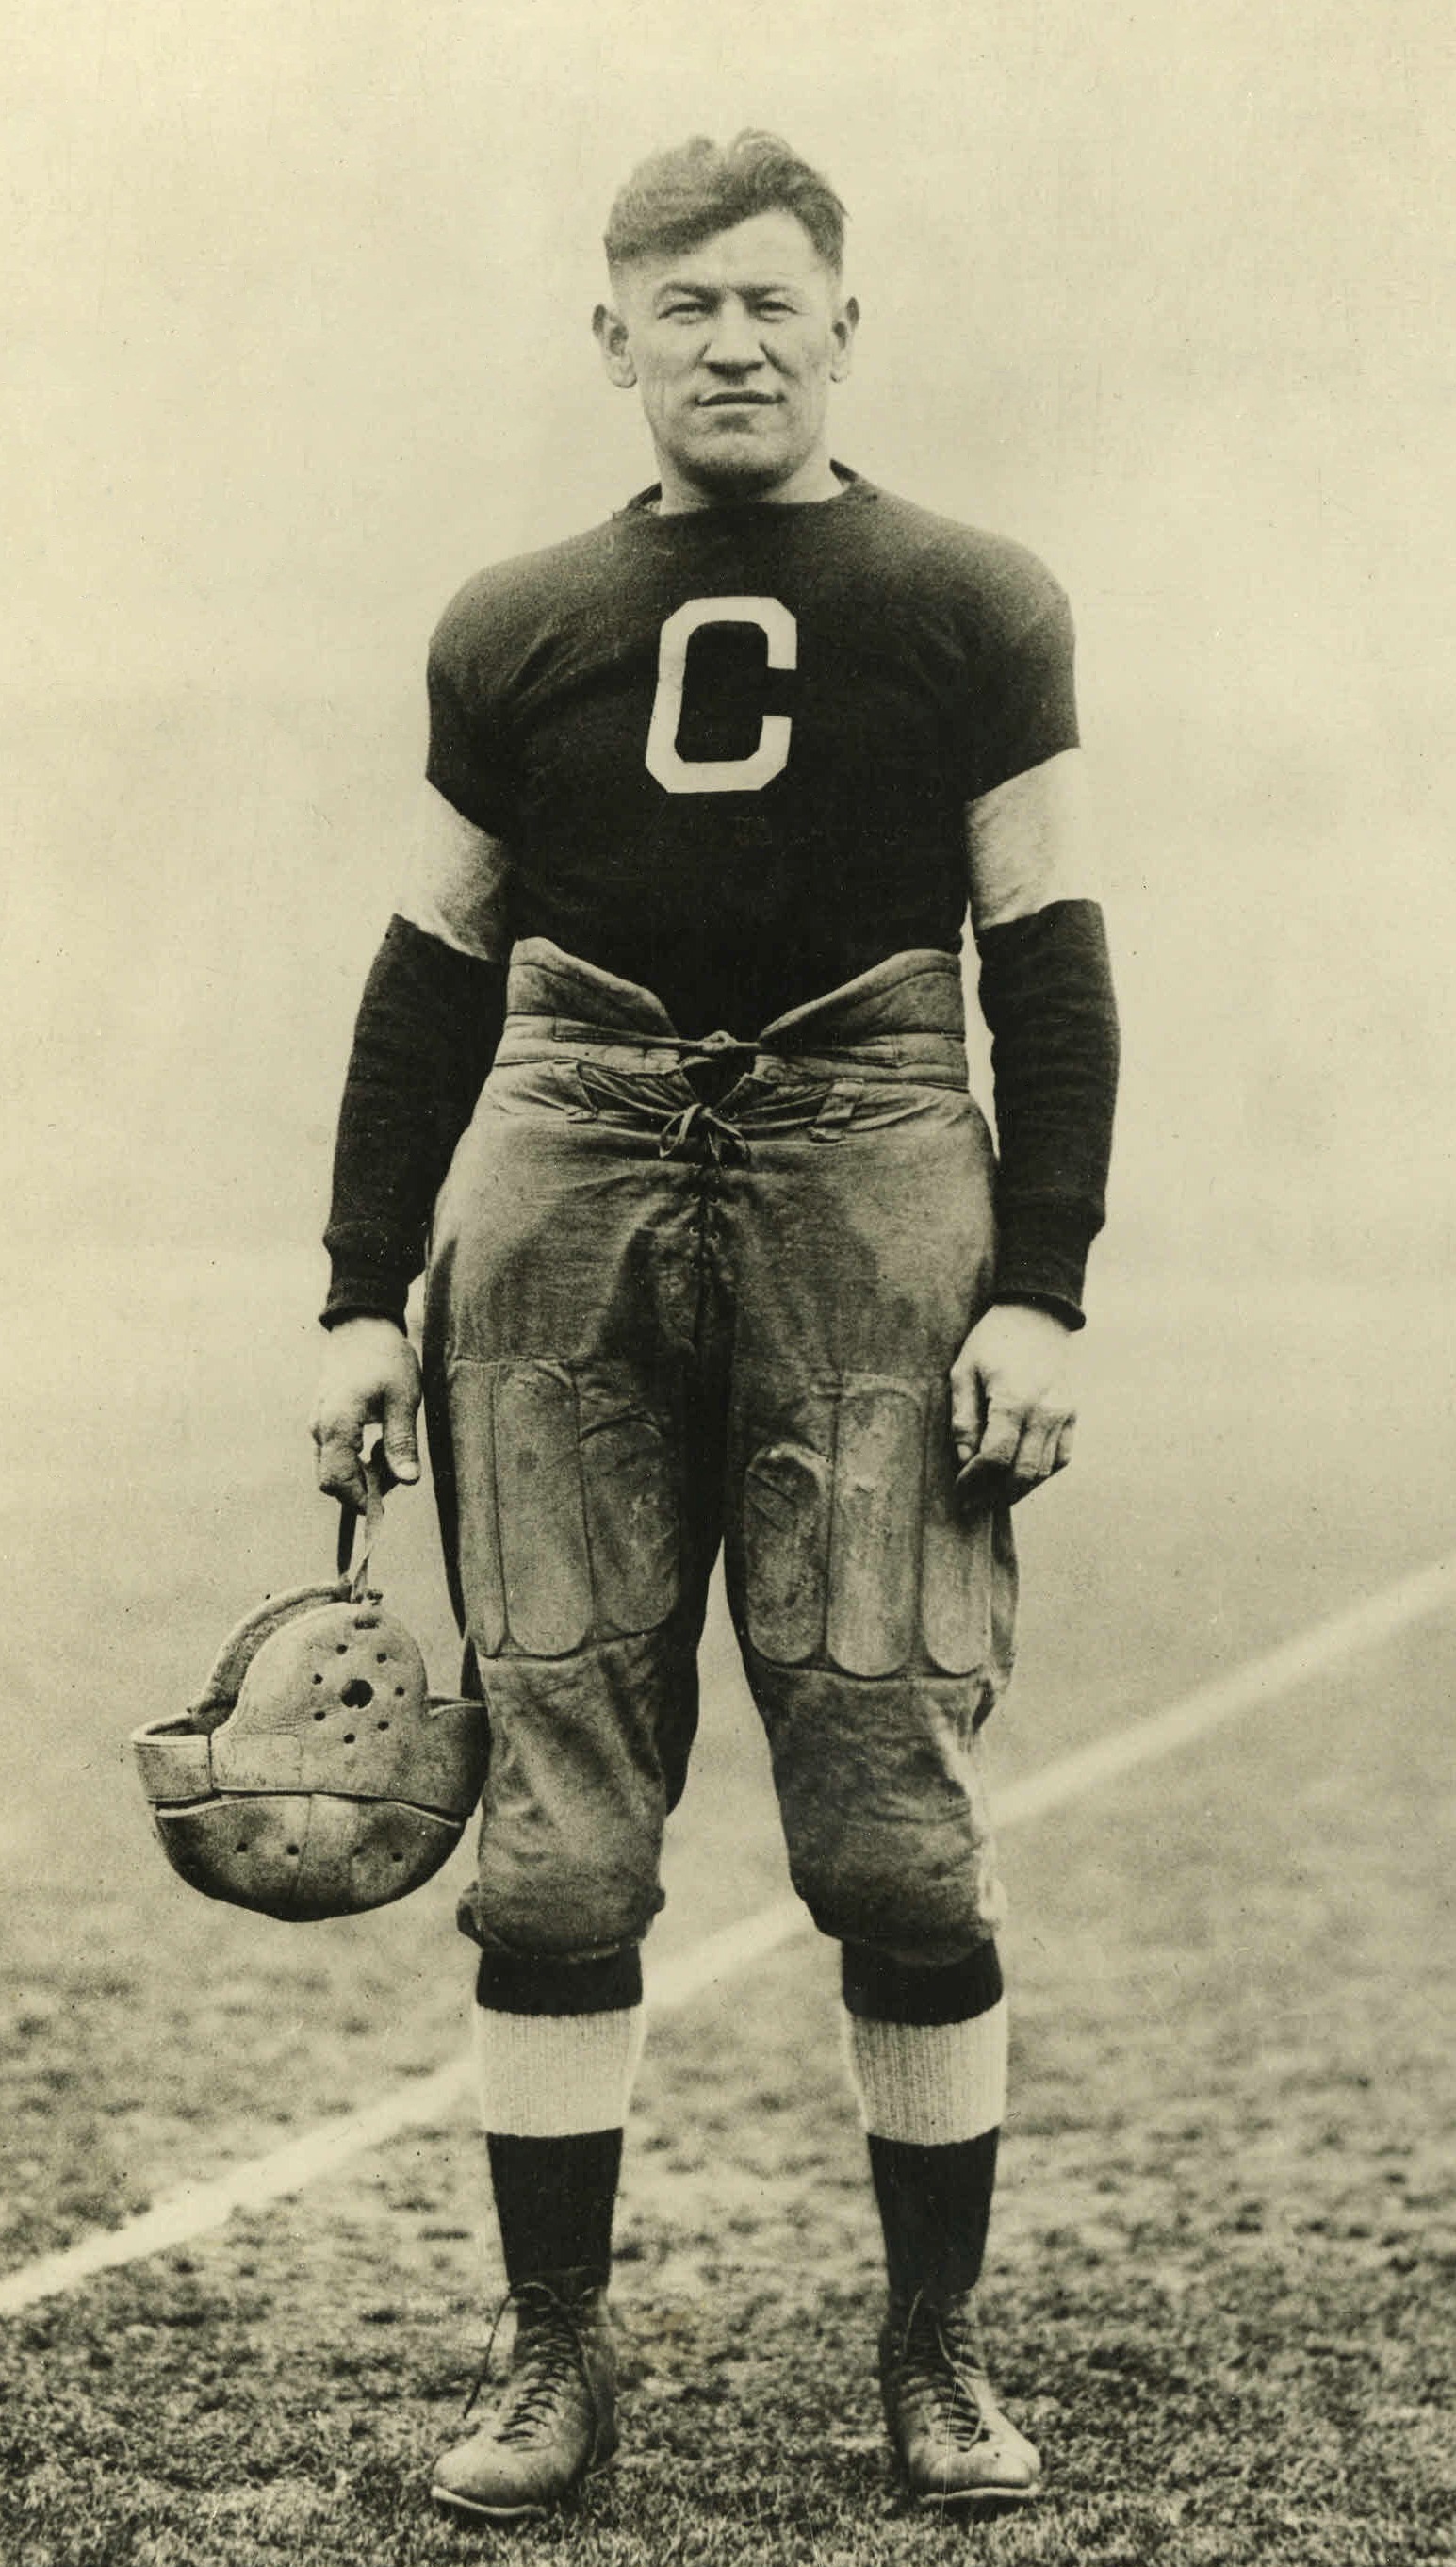 Thorpe played for the Canton Bulldogs from 1915 to 1920. Heritage Auctions.